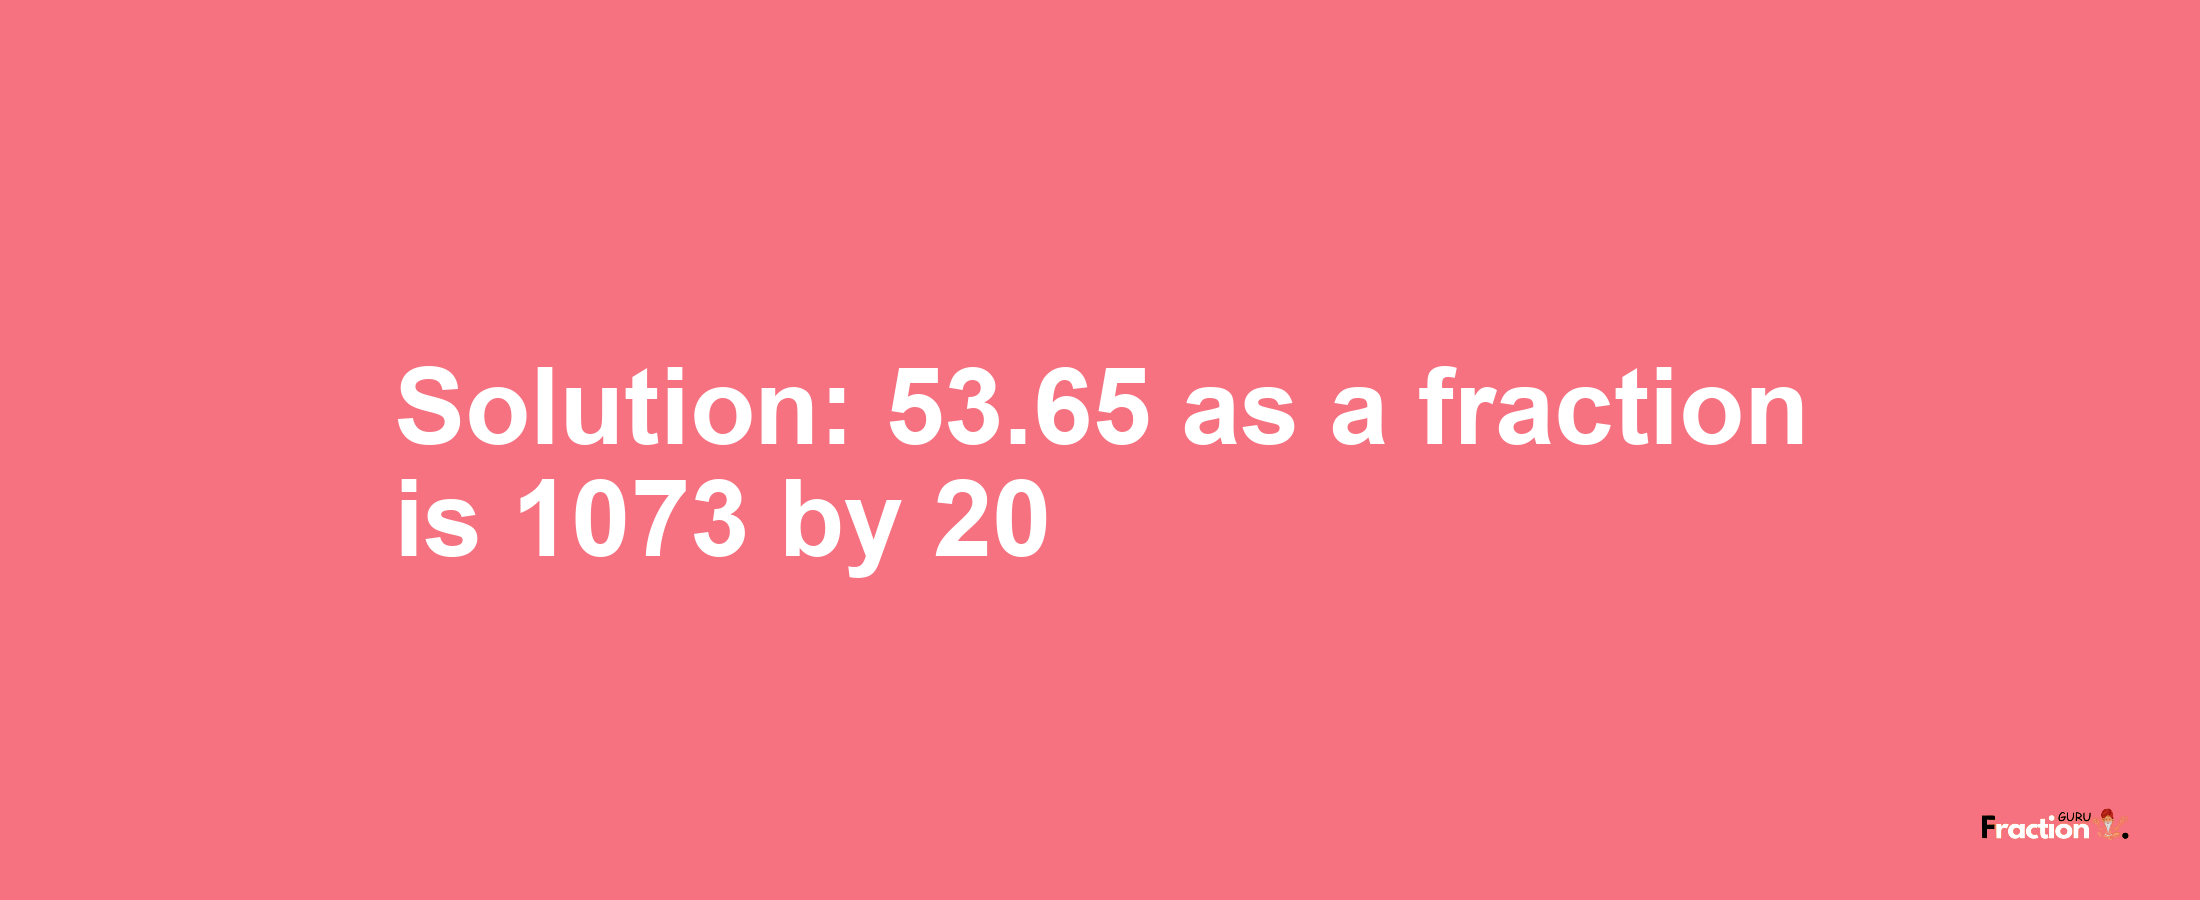 Solution:53.65 as a fraction is 1073/20